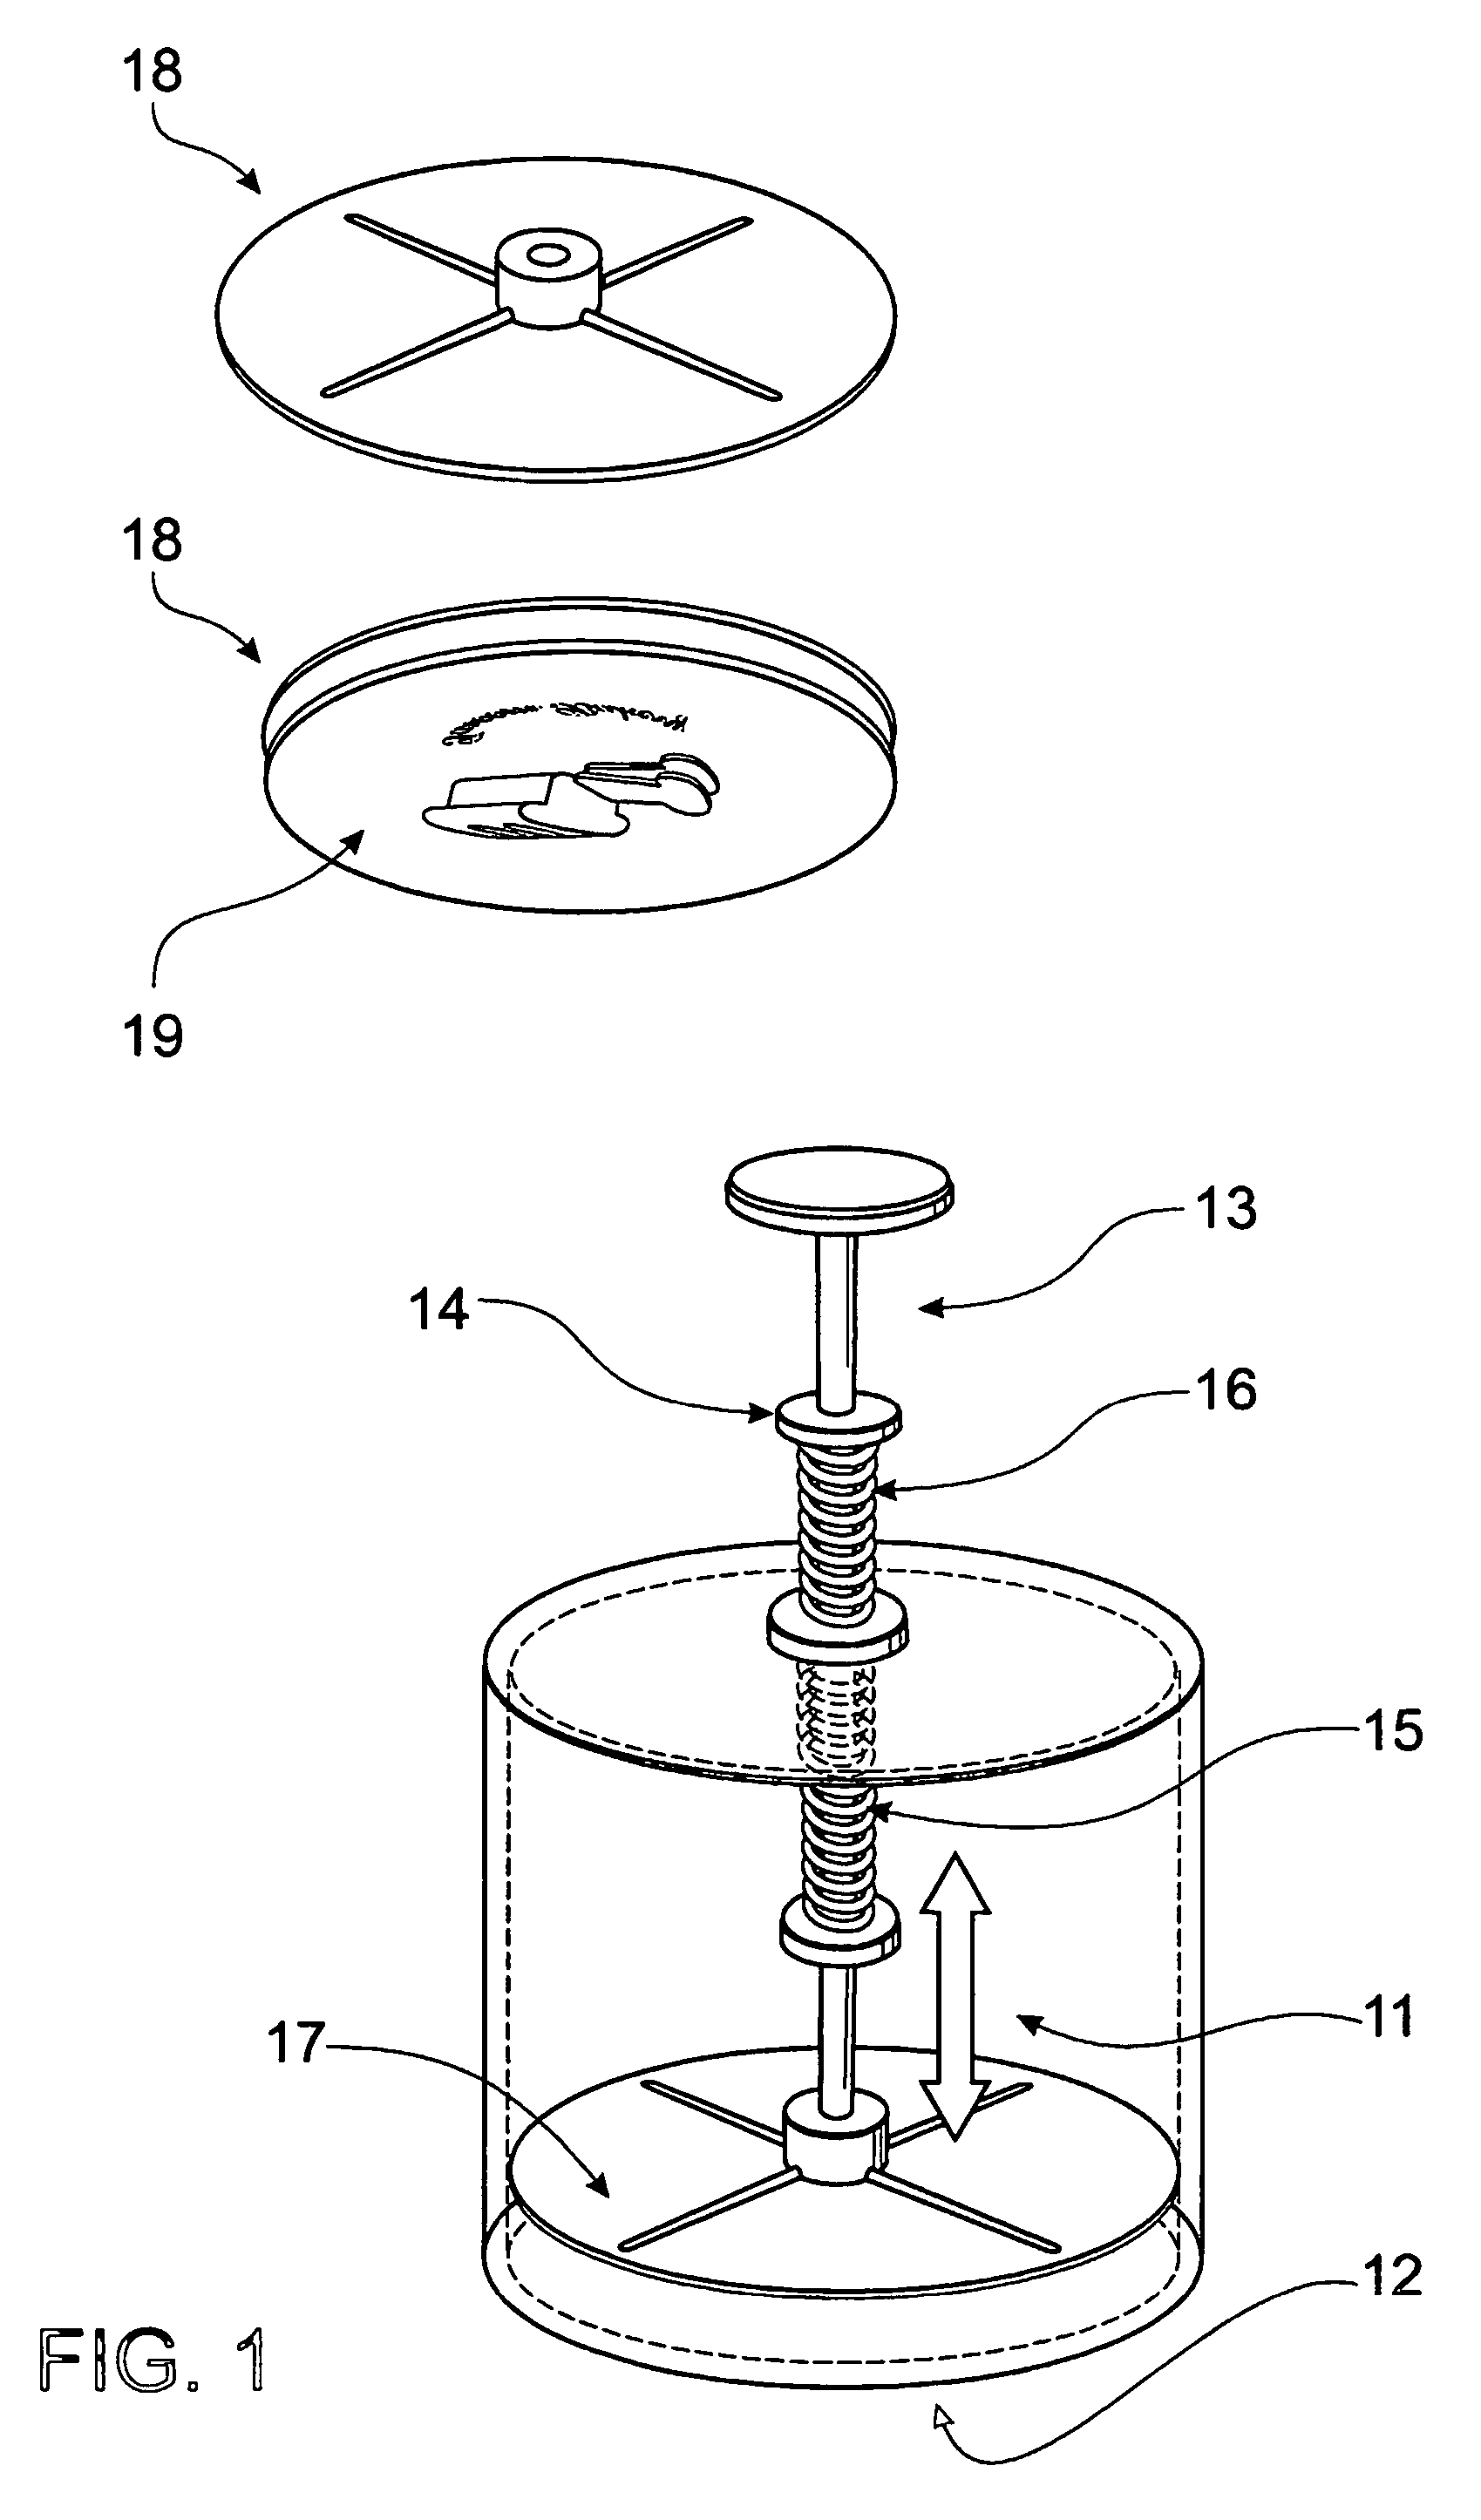 Method and apparatus for making bakery products